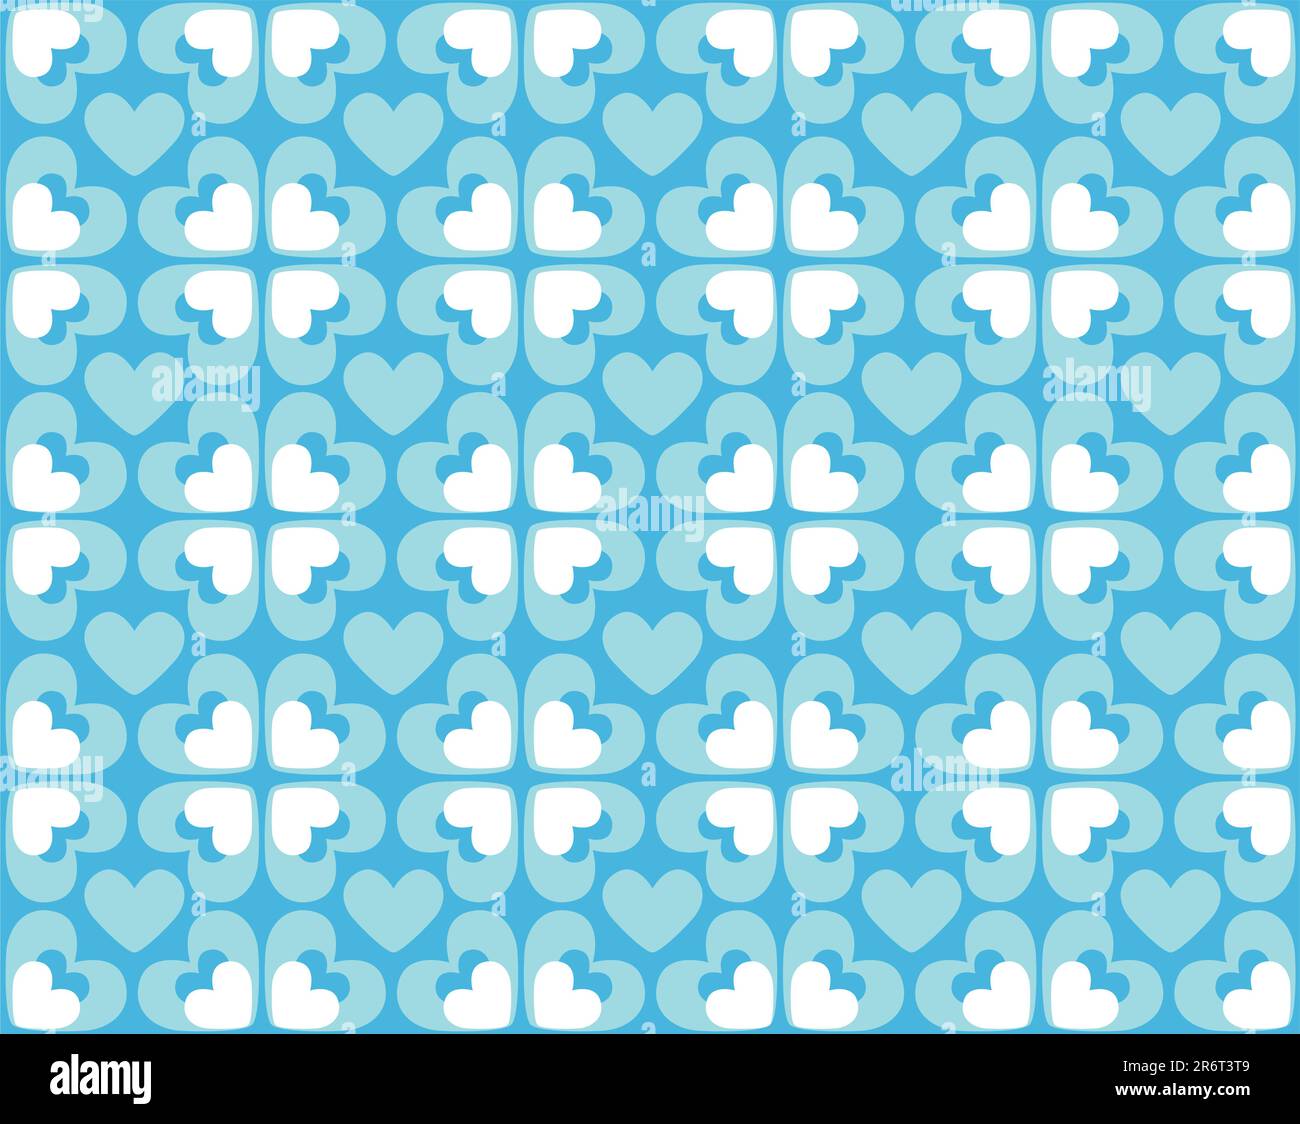 Seamless heart pattern in blue and white Stock Vector